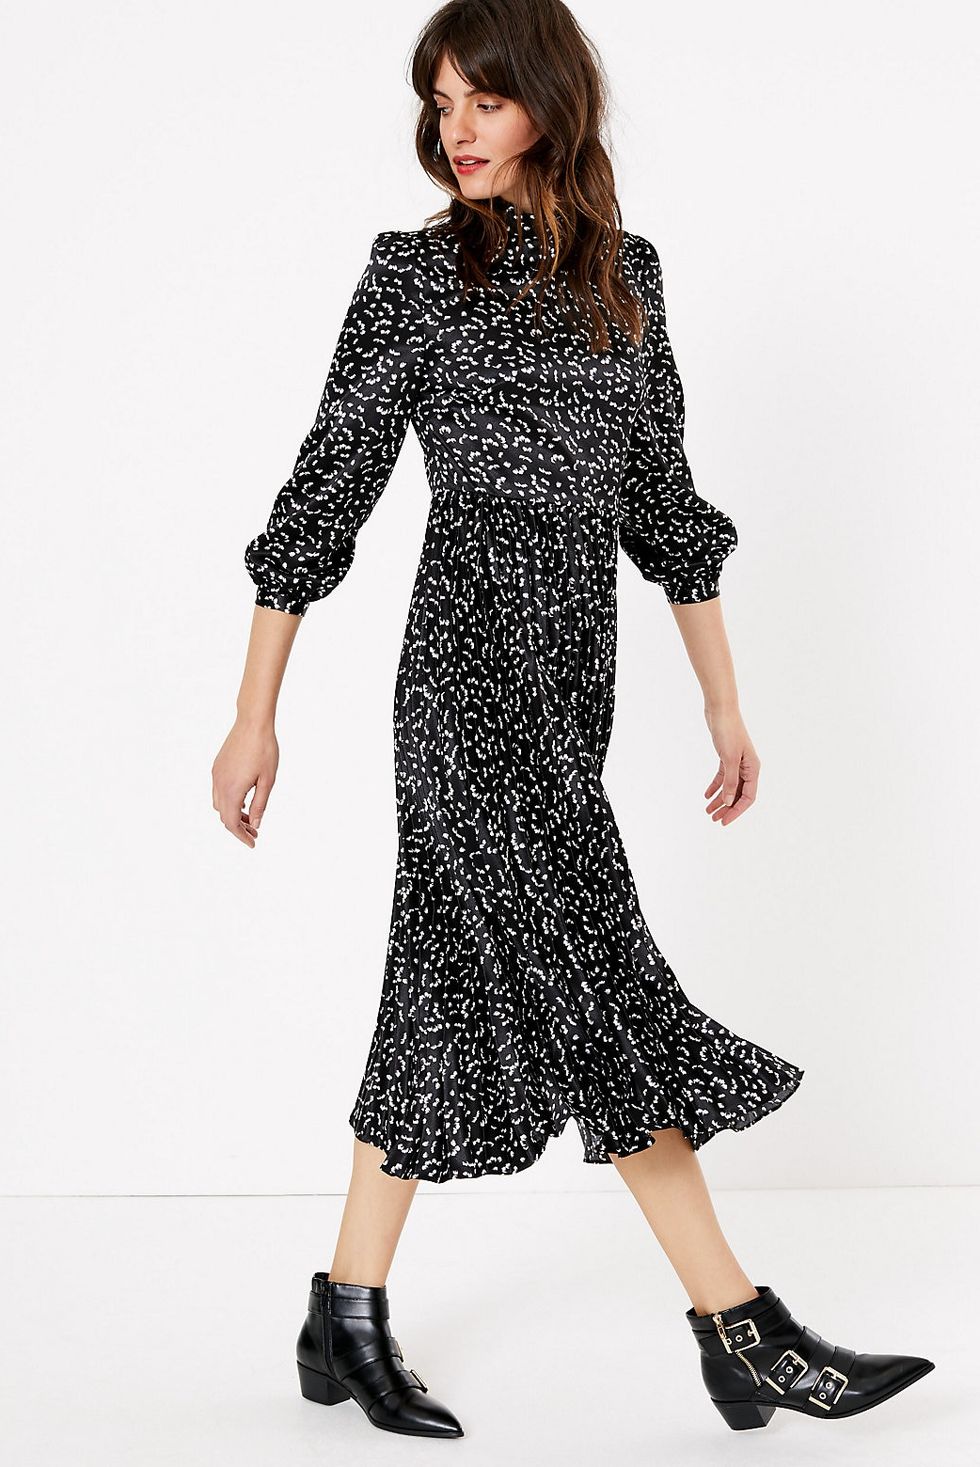 This M&S printed satin dress is perfect for all occasions